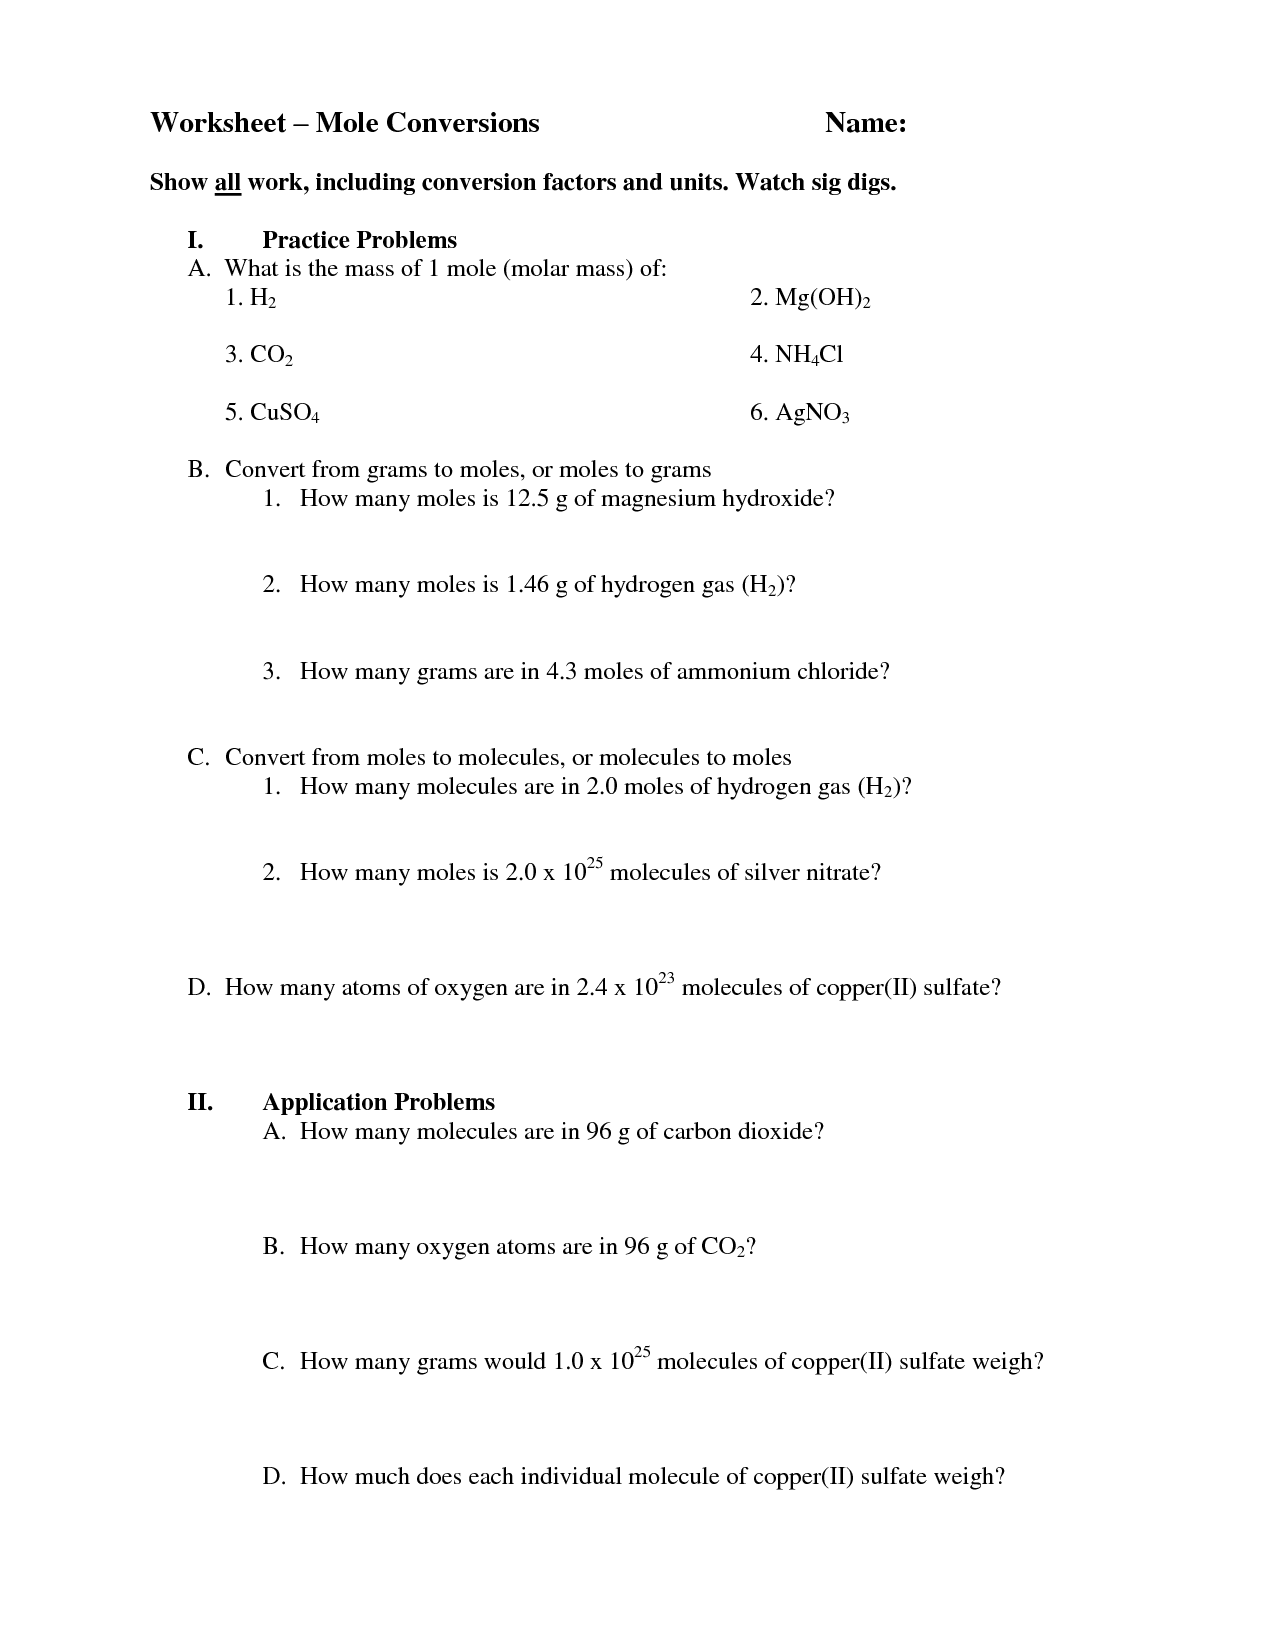 10-best-images-of-moles-and-mass-worksheet-answers-moles-and-molar